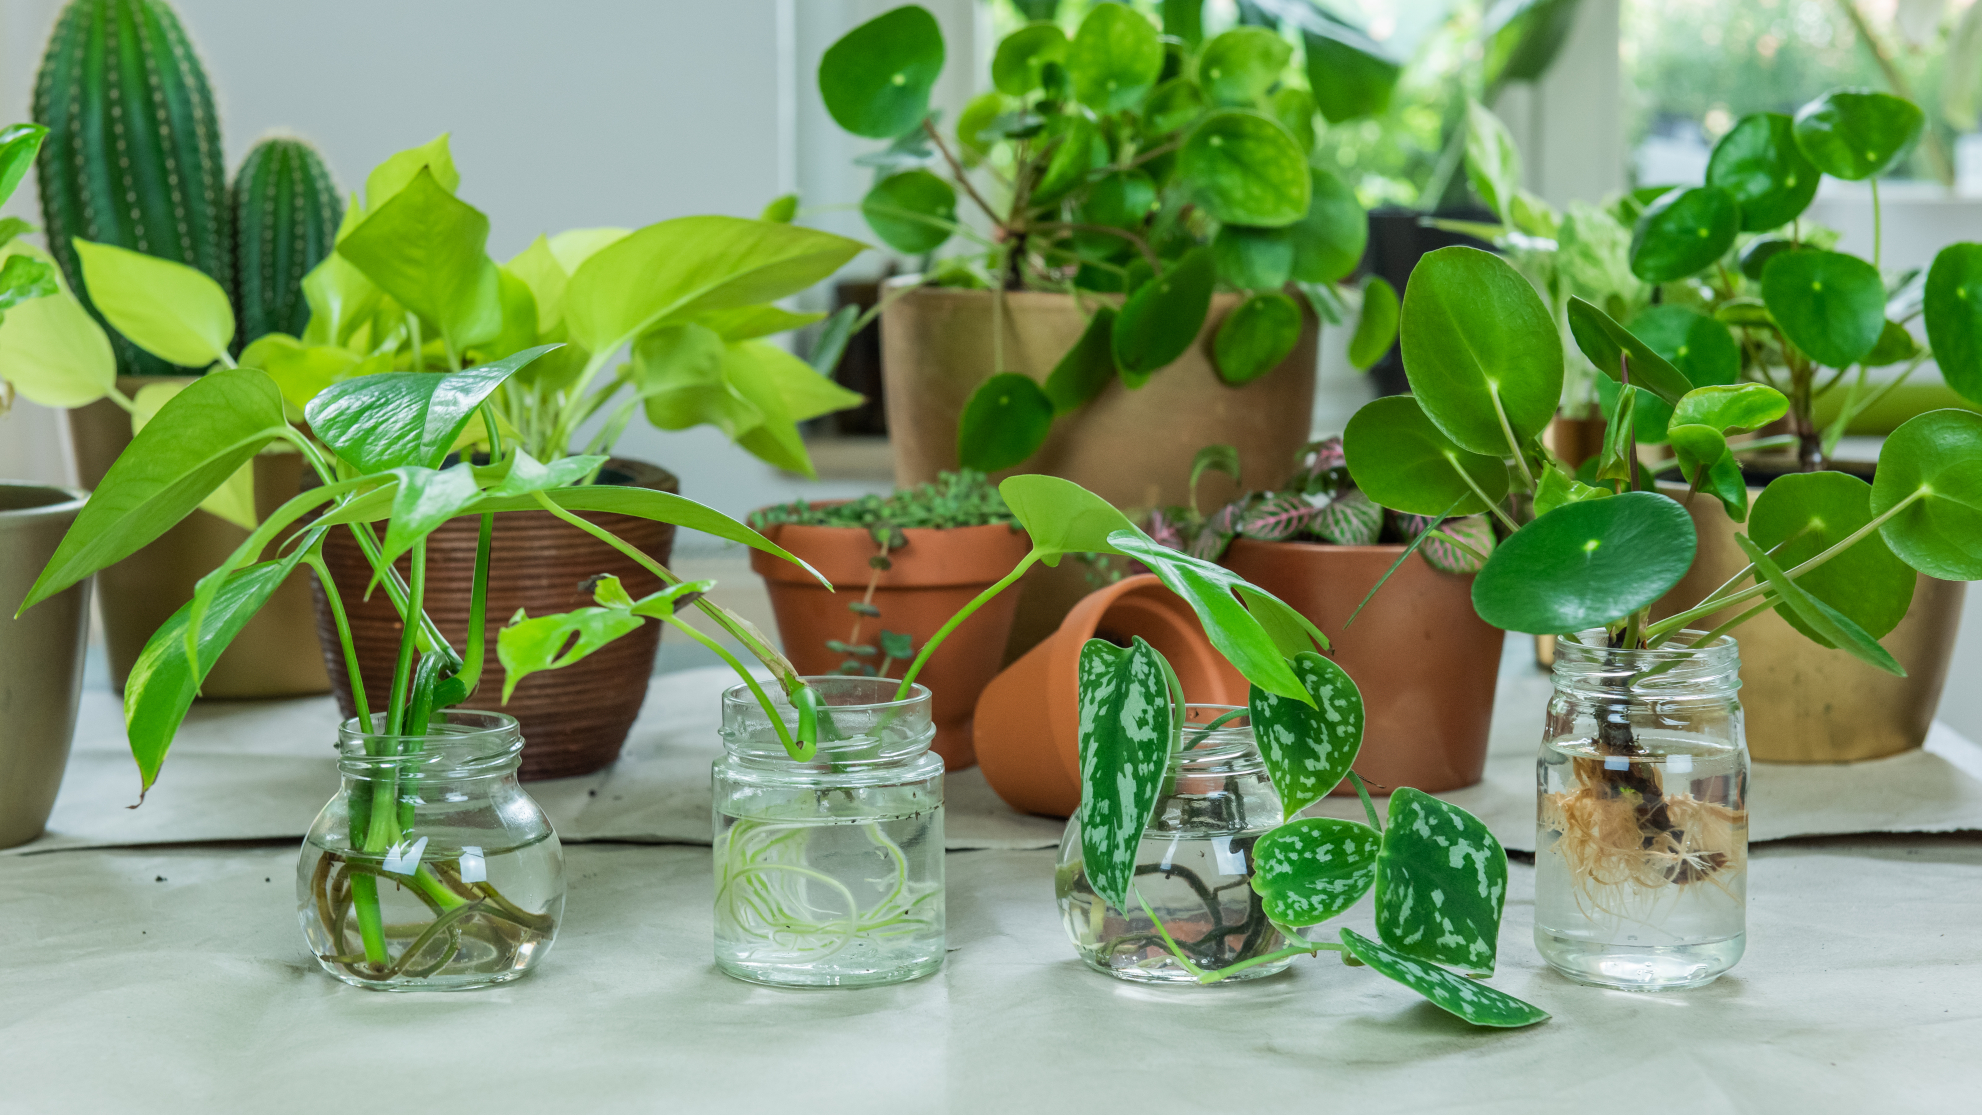 5 houseplants you can propagate easily – and how to do it | Tom's Guide